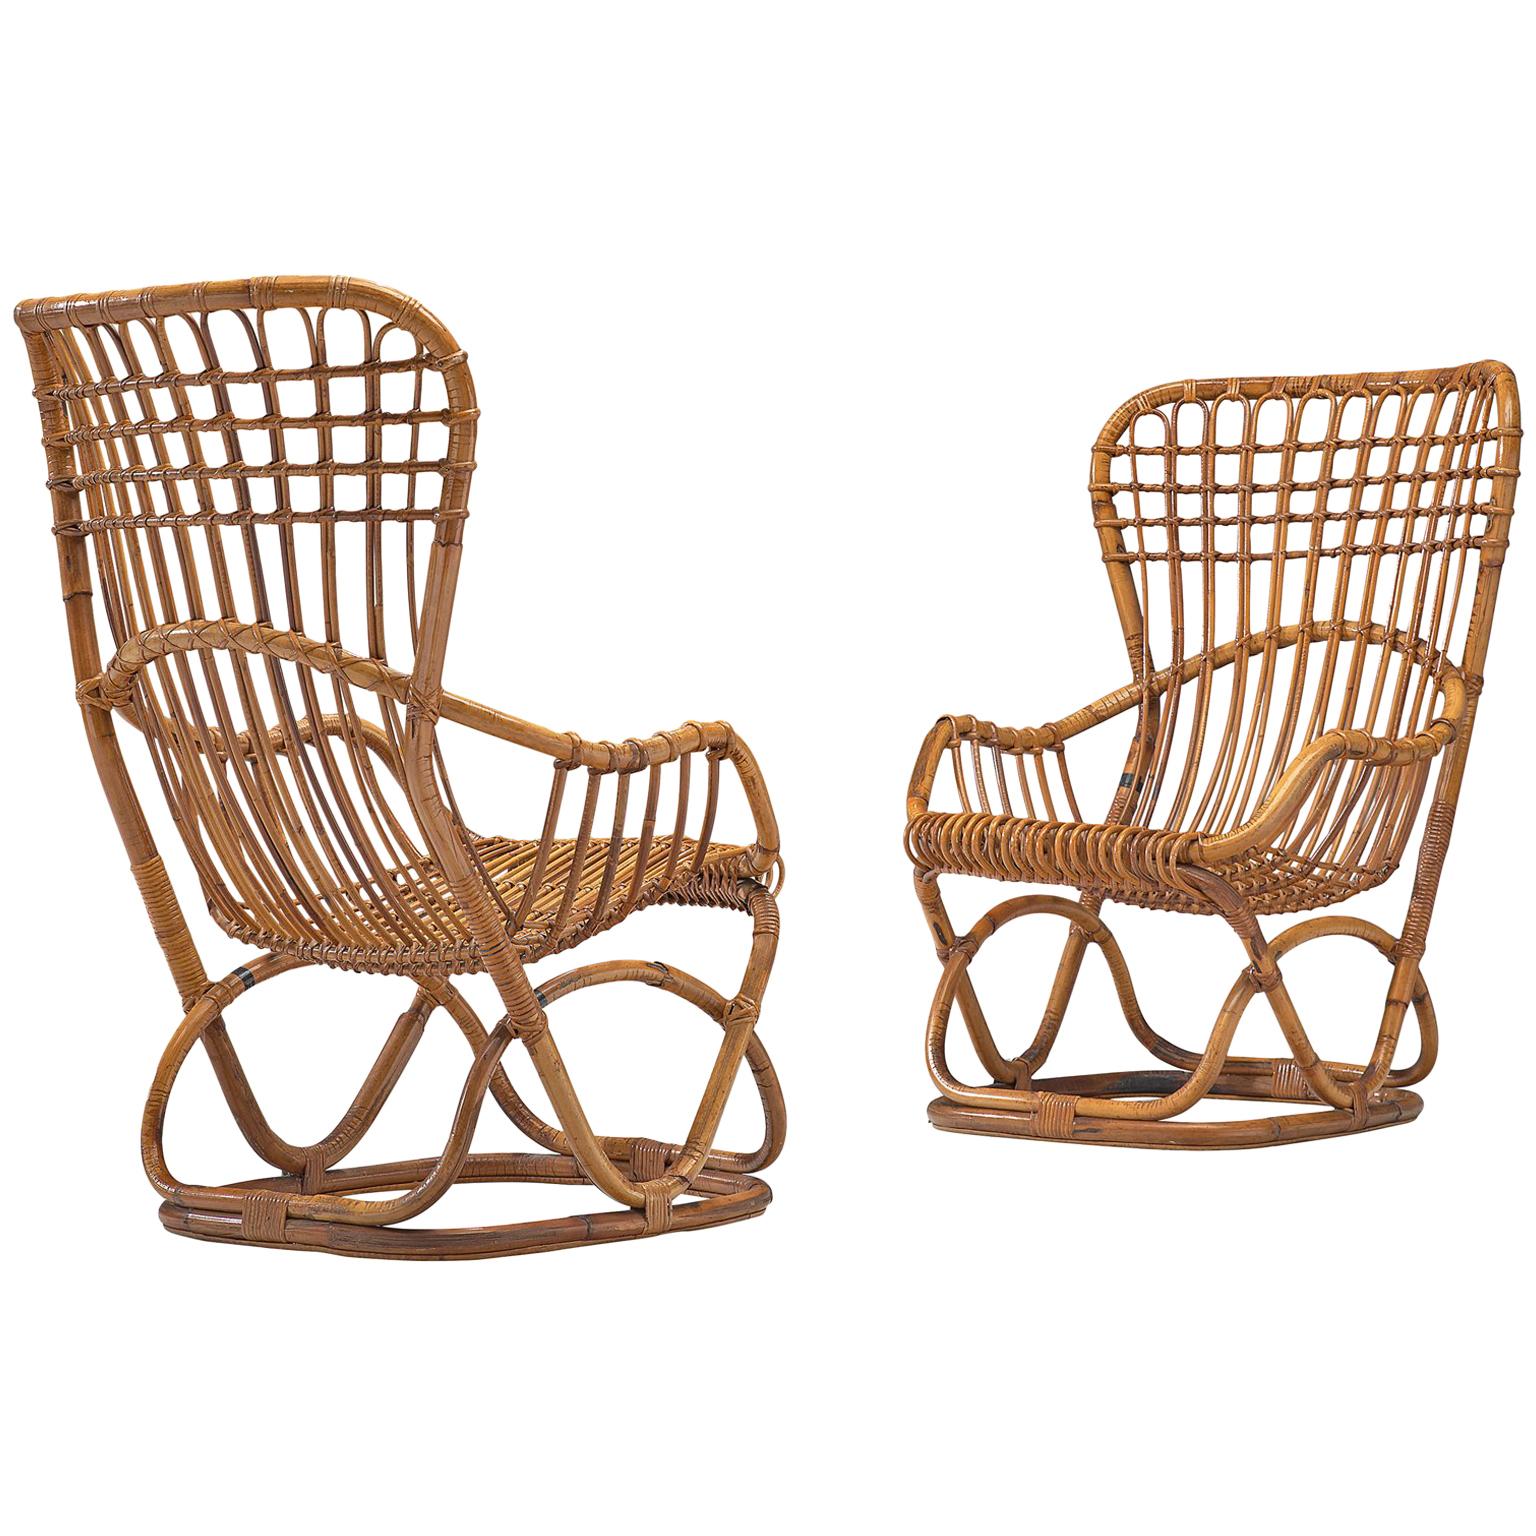 Tito Agnoli Inspired Pair of Rattan Lounge Chairs